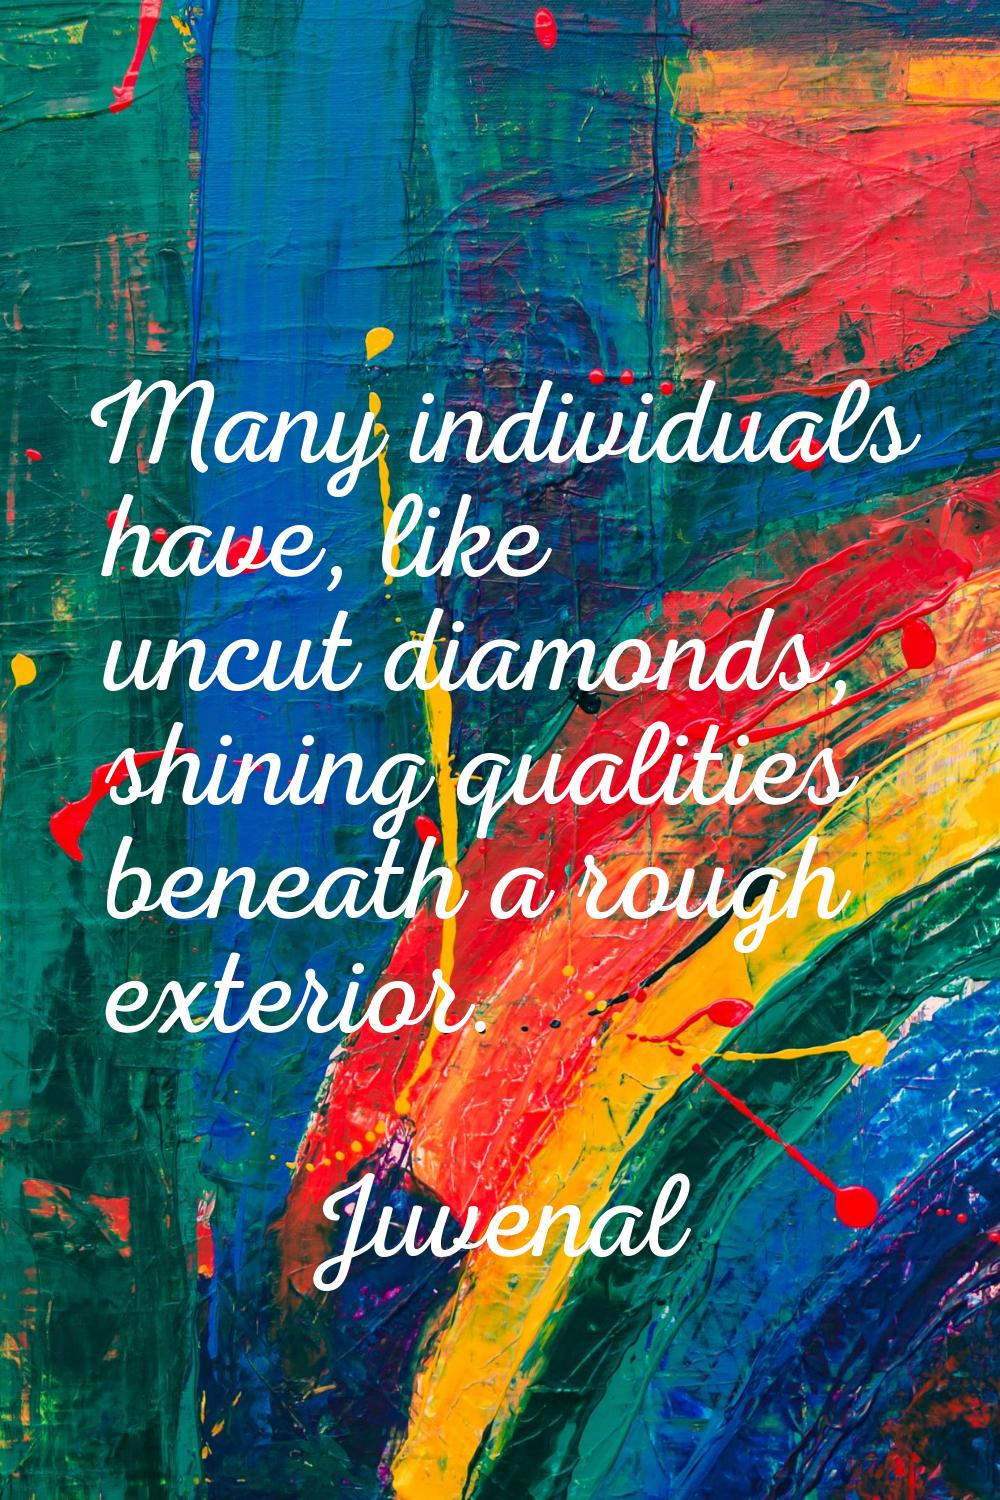 Many individuals have, like uncut diamonds, shining qualities beneath a rough exterior.